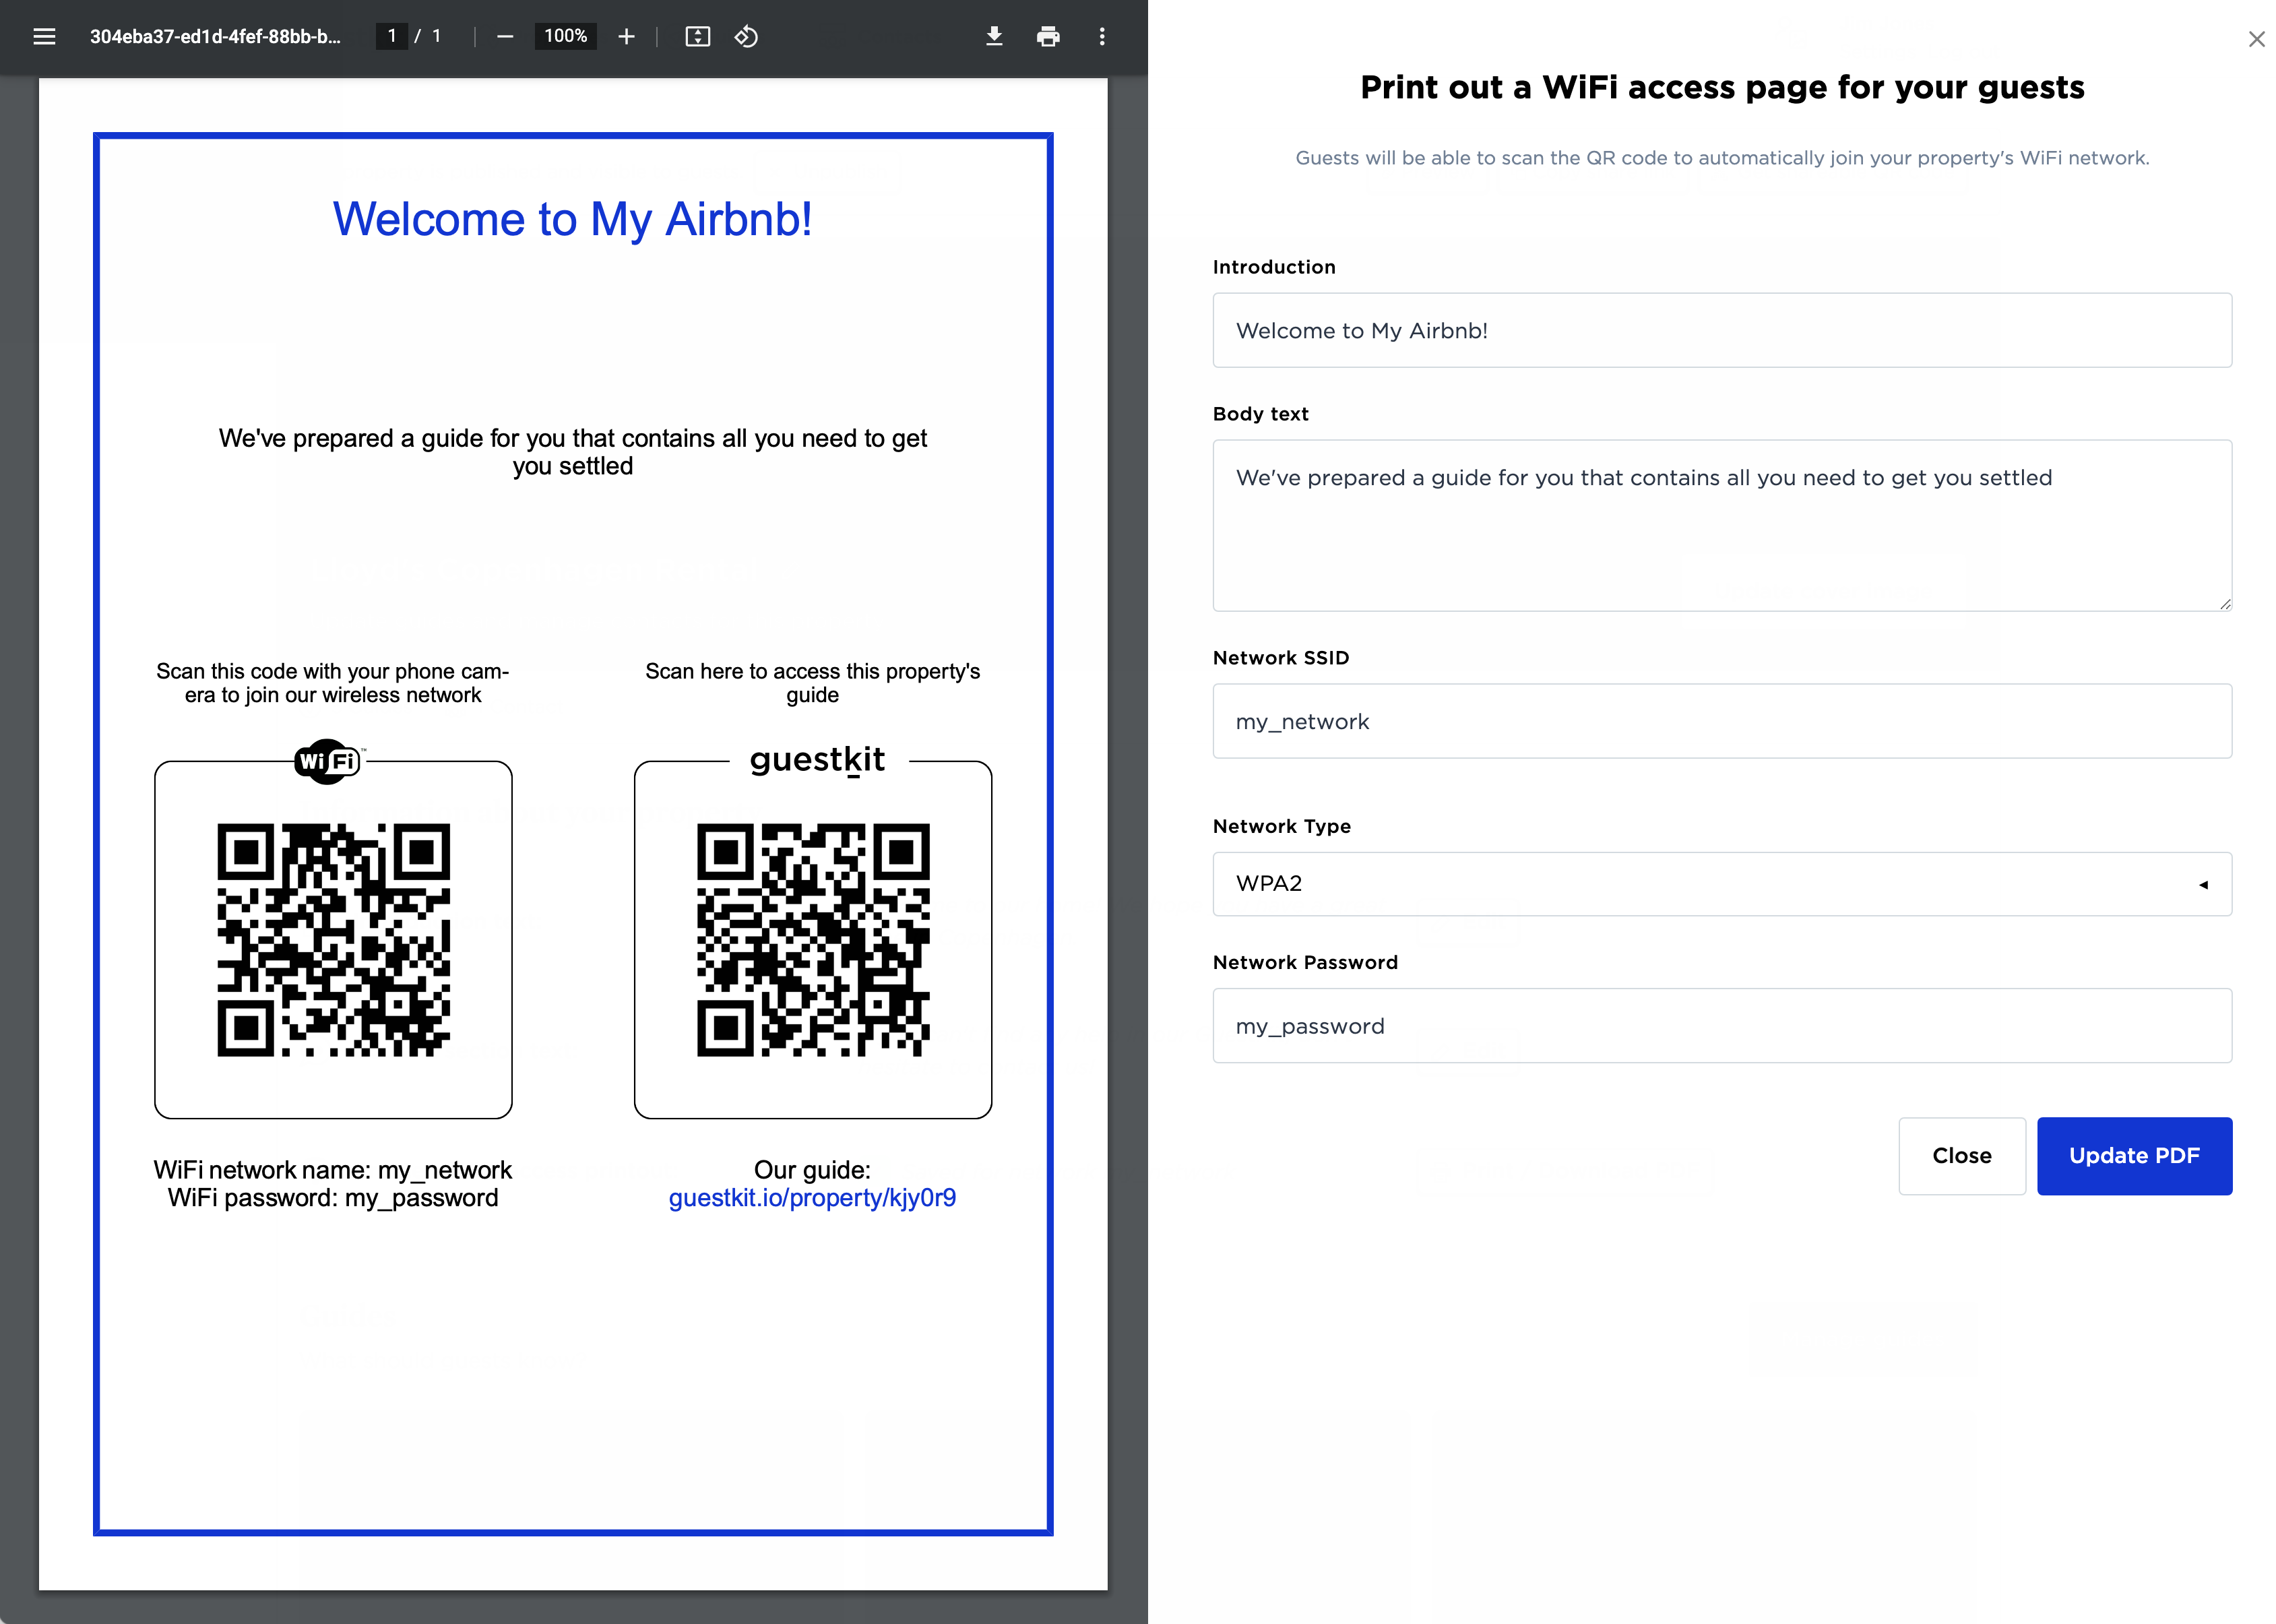 Editor interface for generating PDF printout for guests to connect to wifi/load guestkit.